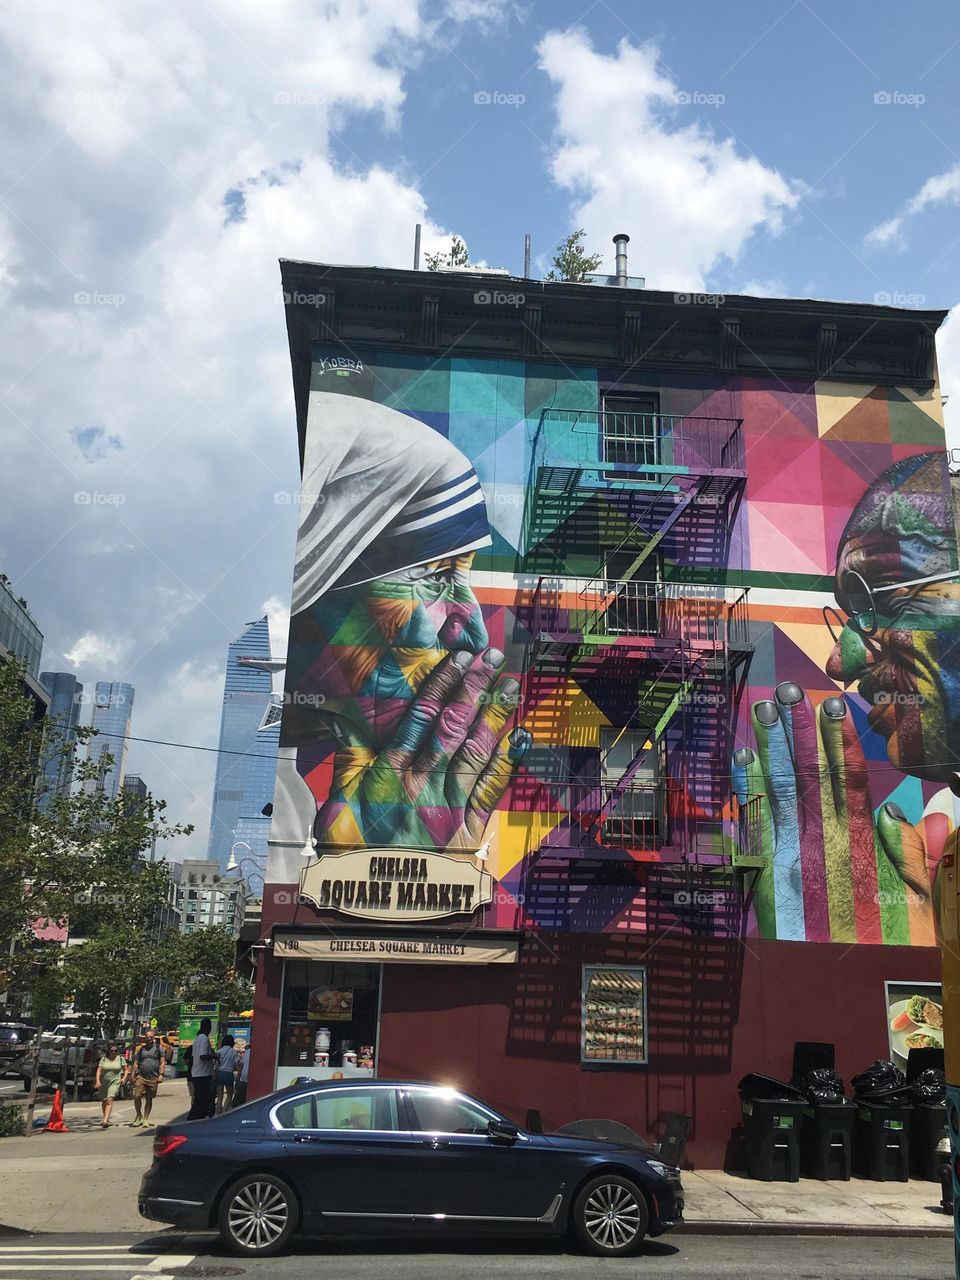 Mural in the city